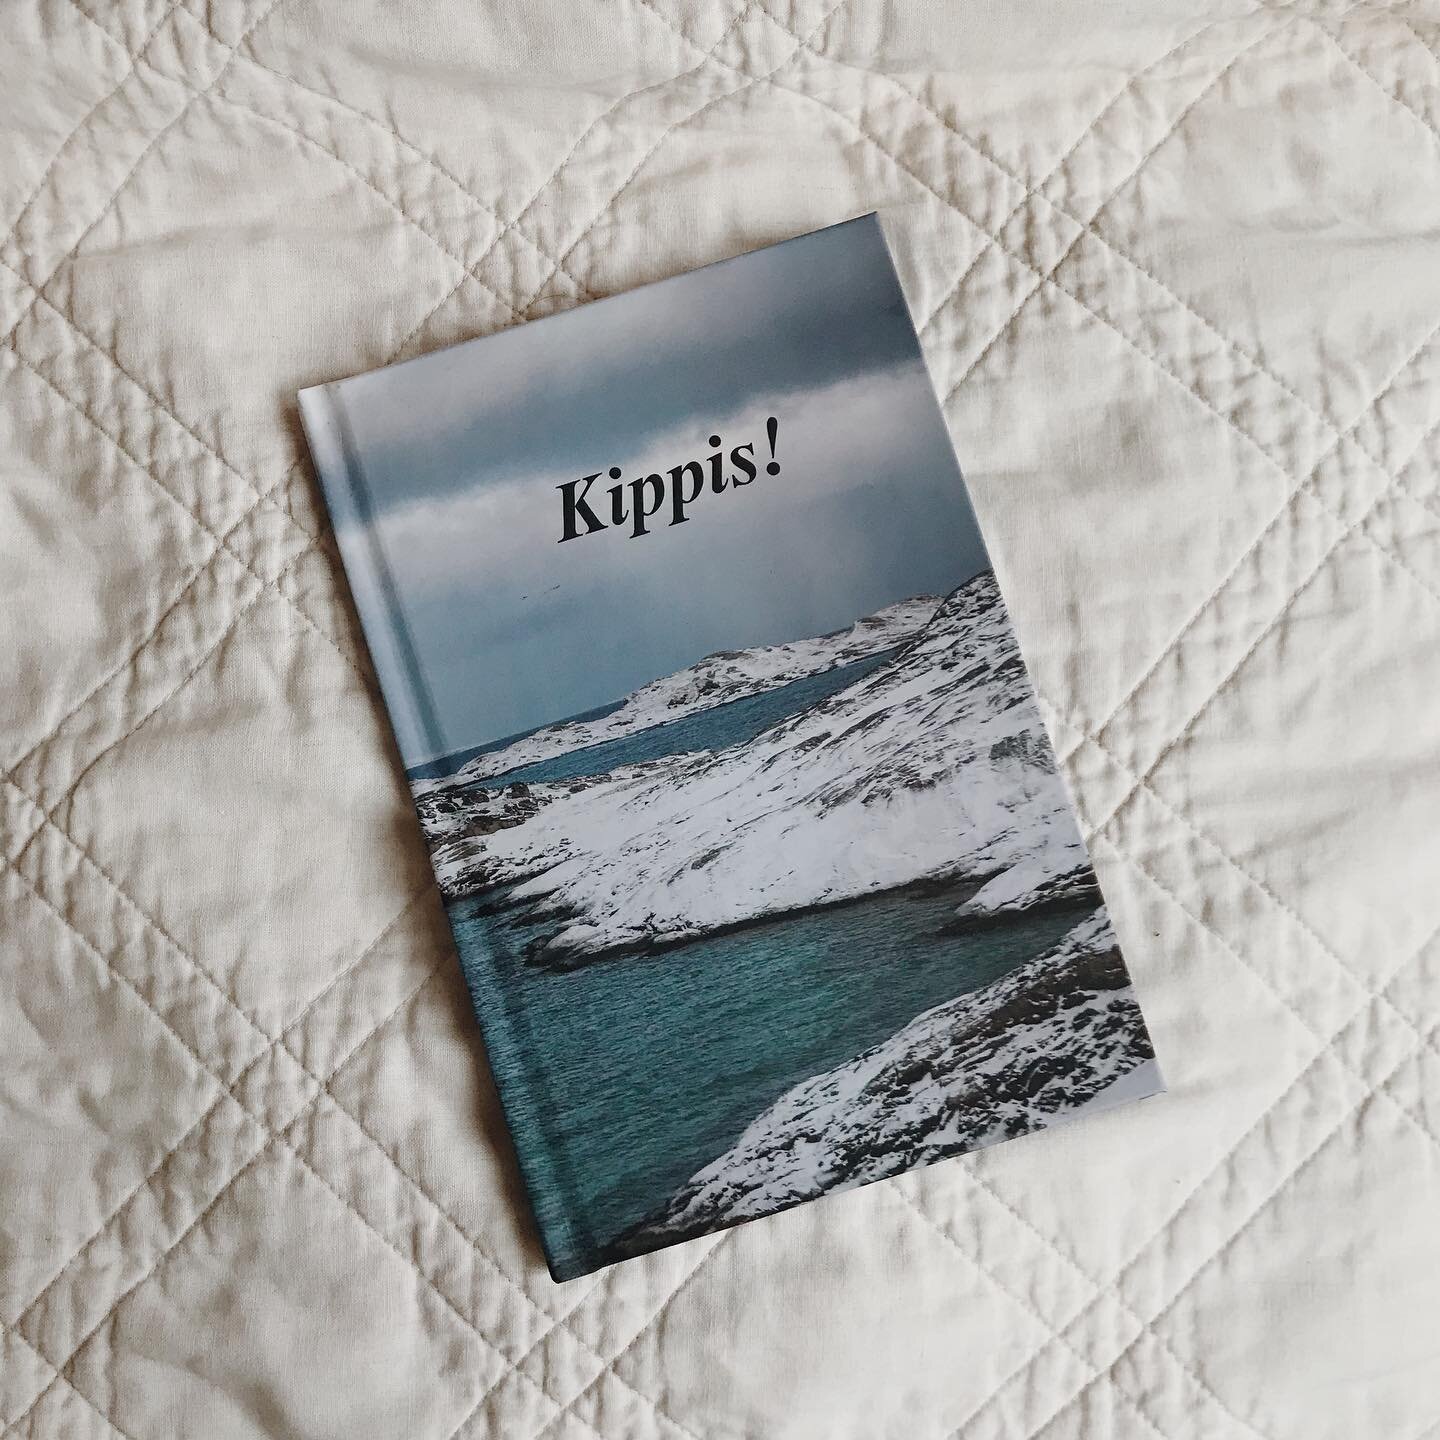 hi everyone! I made a book! That you can purchase! I finally compiled all my favorite photos from my semester in Finland and you can preview &amp; purchase this 42 page, hardcover book from blurb for $30 via the link in my bio✨